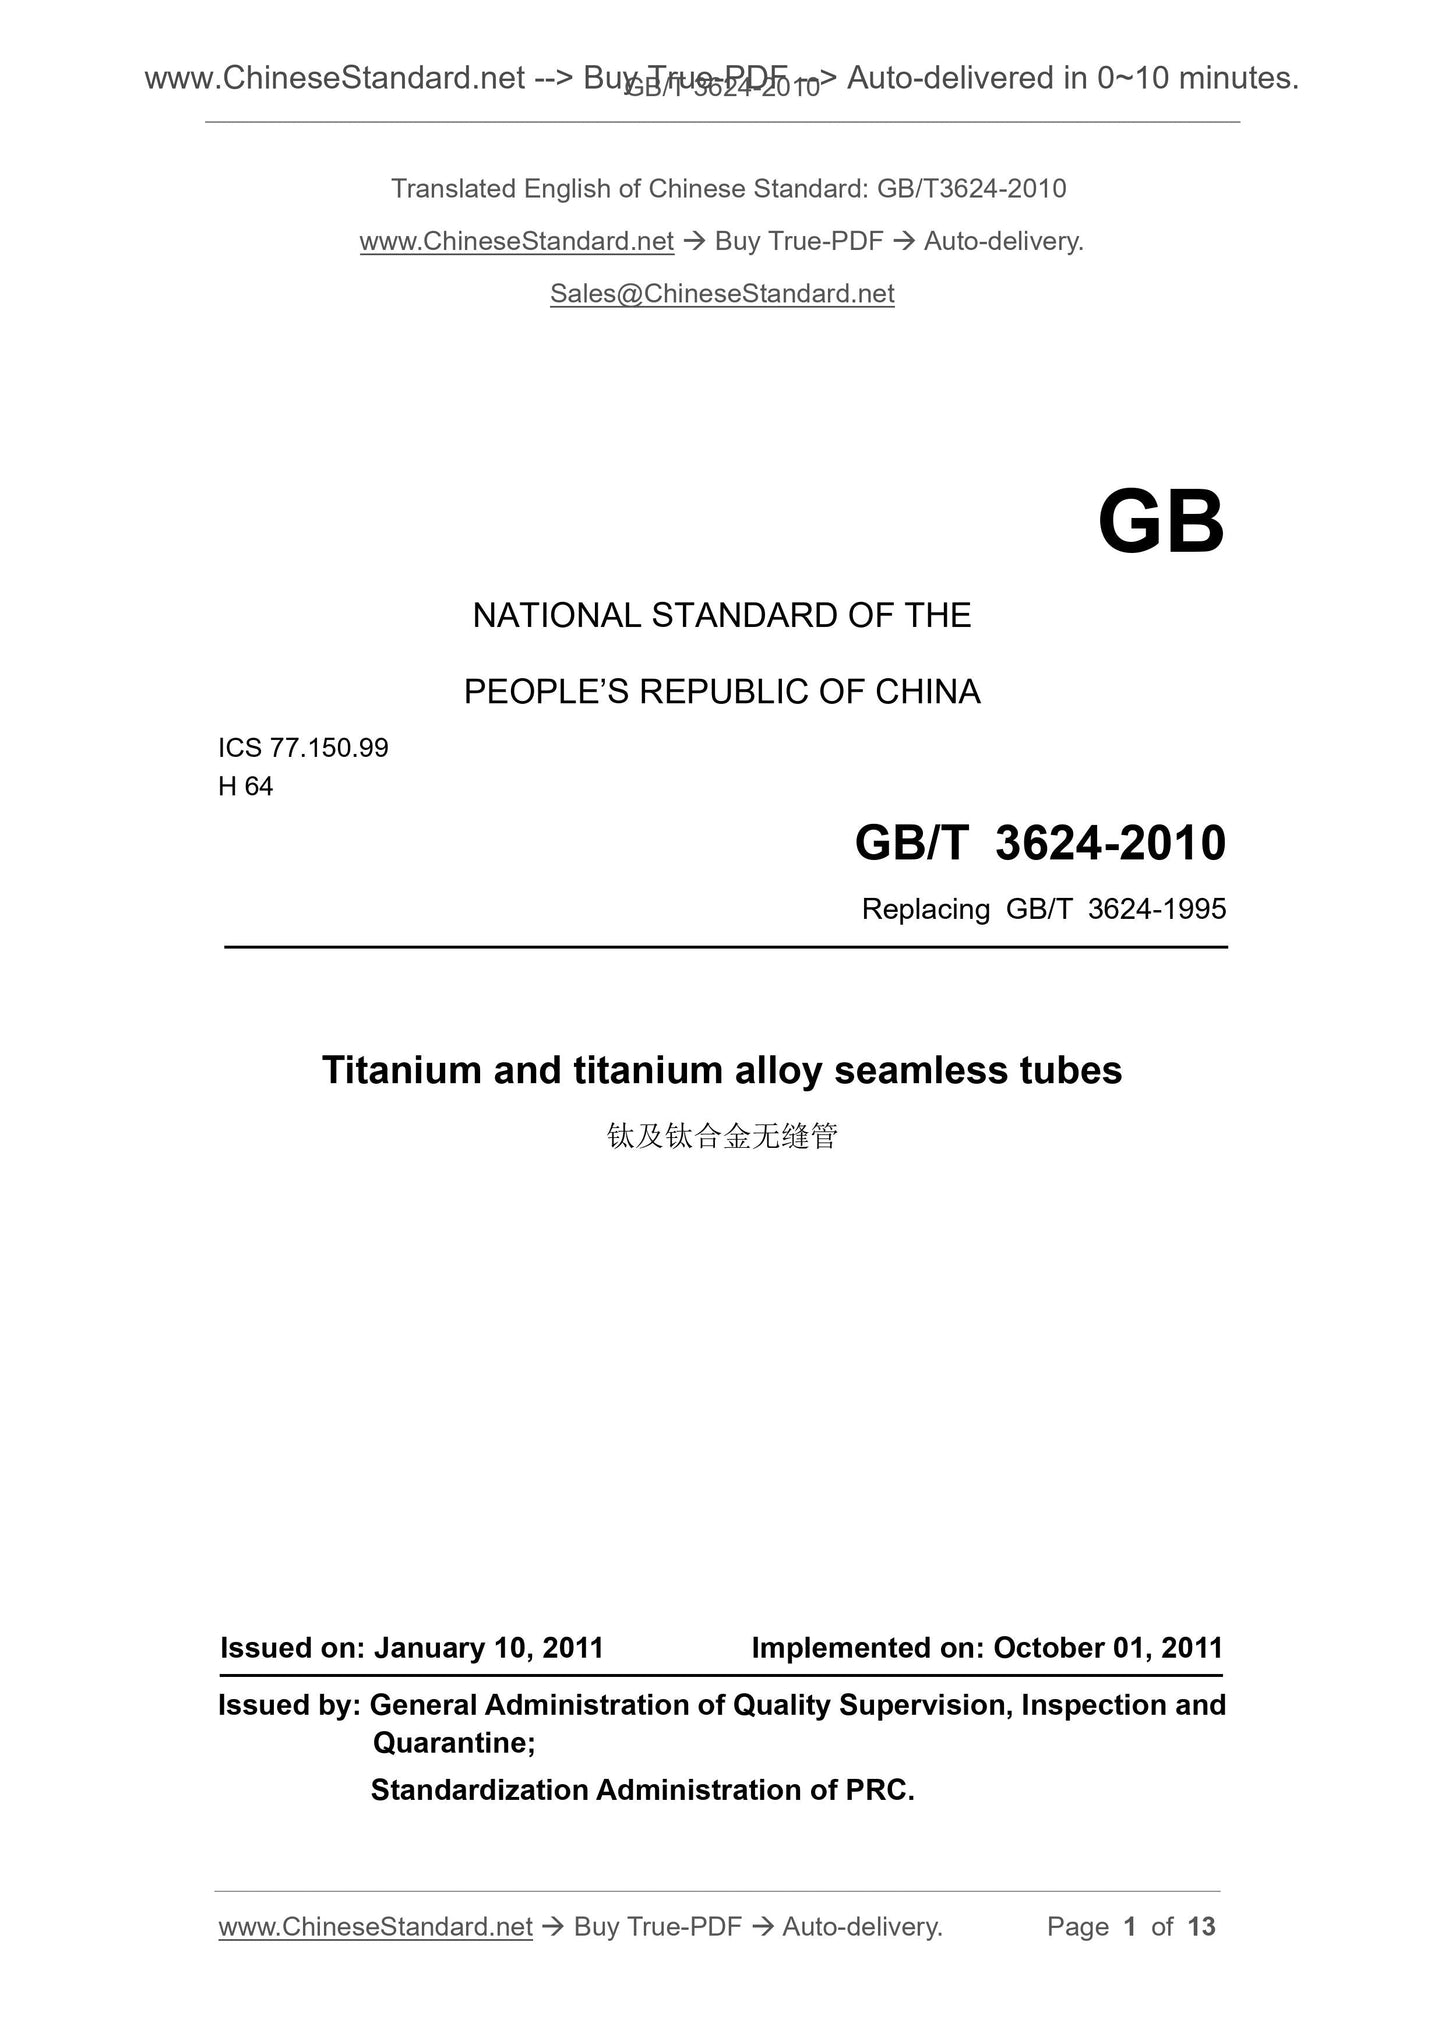 GB/T 3624-2010 Page 1